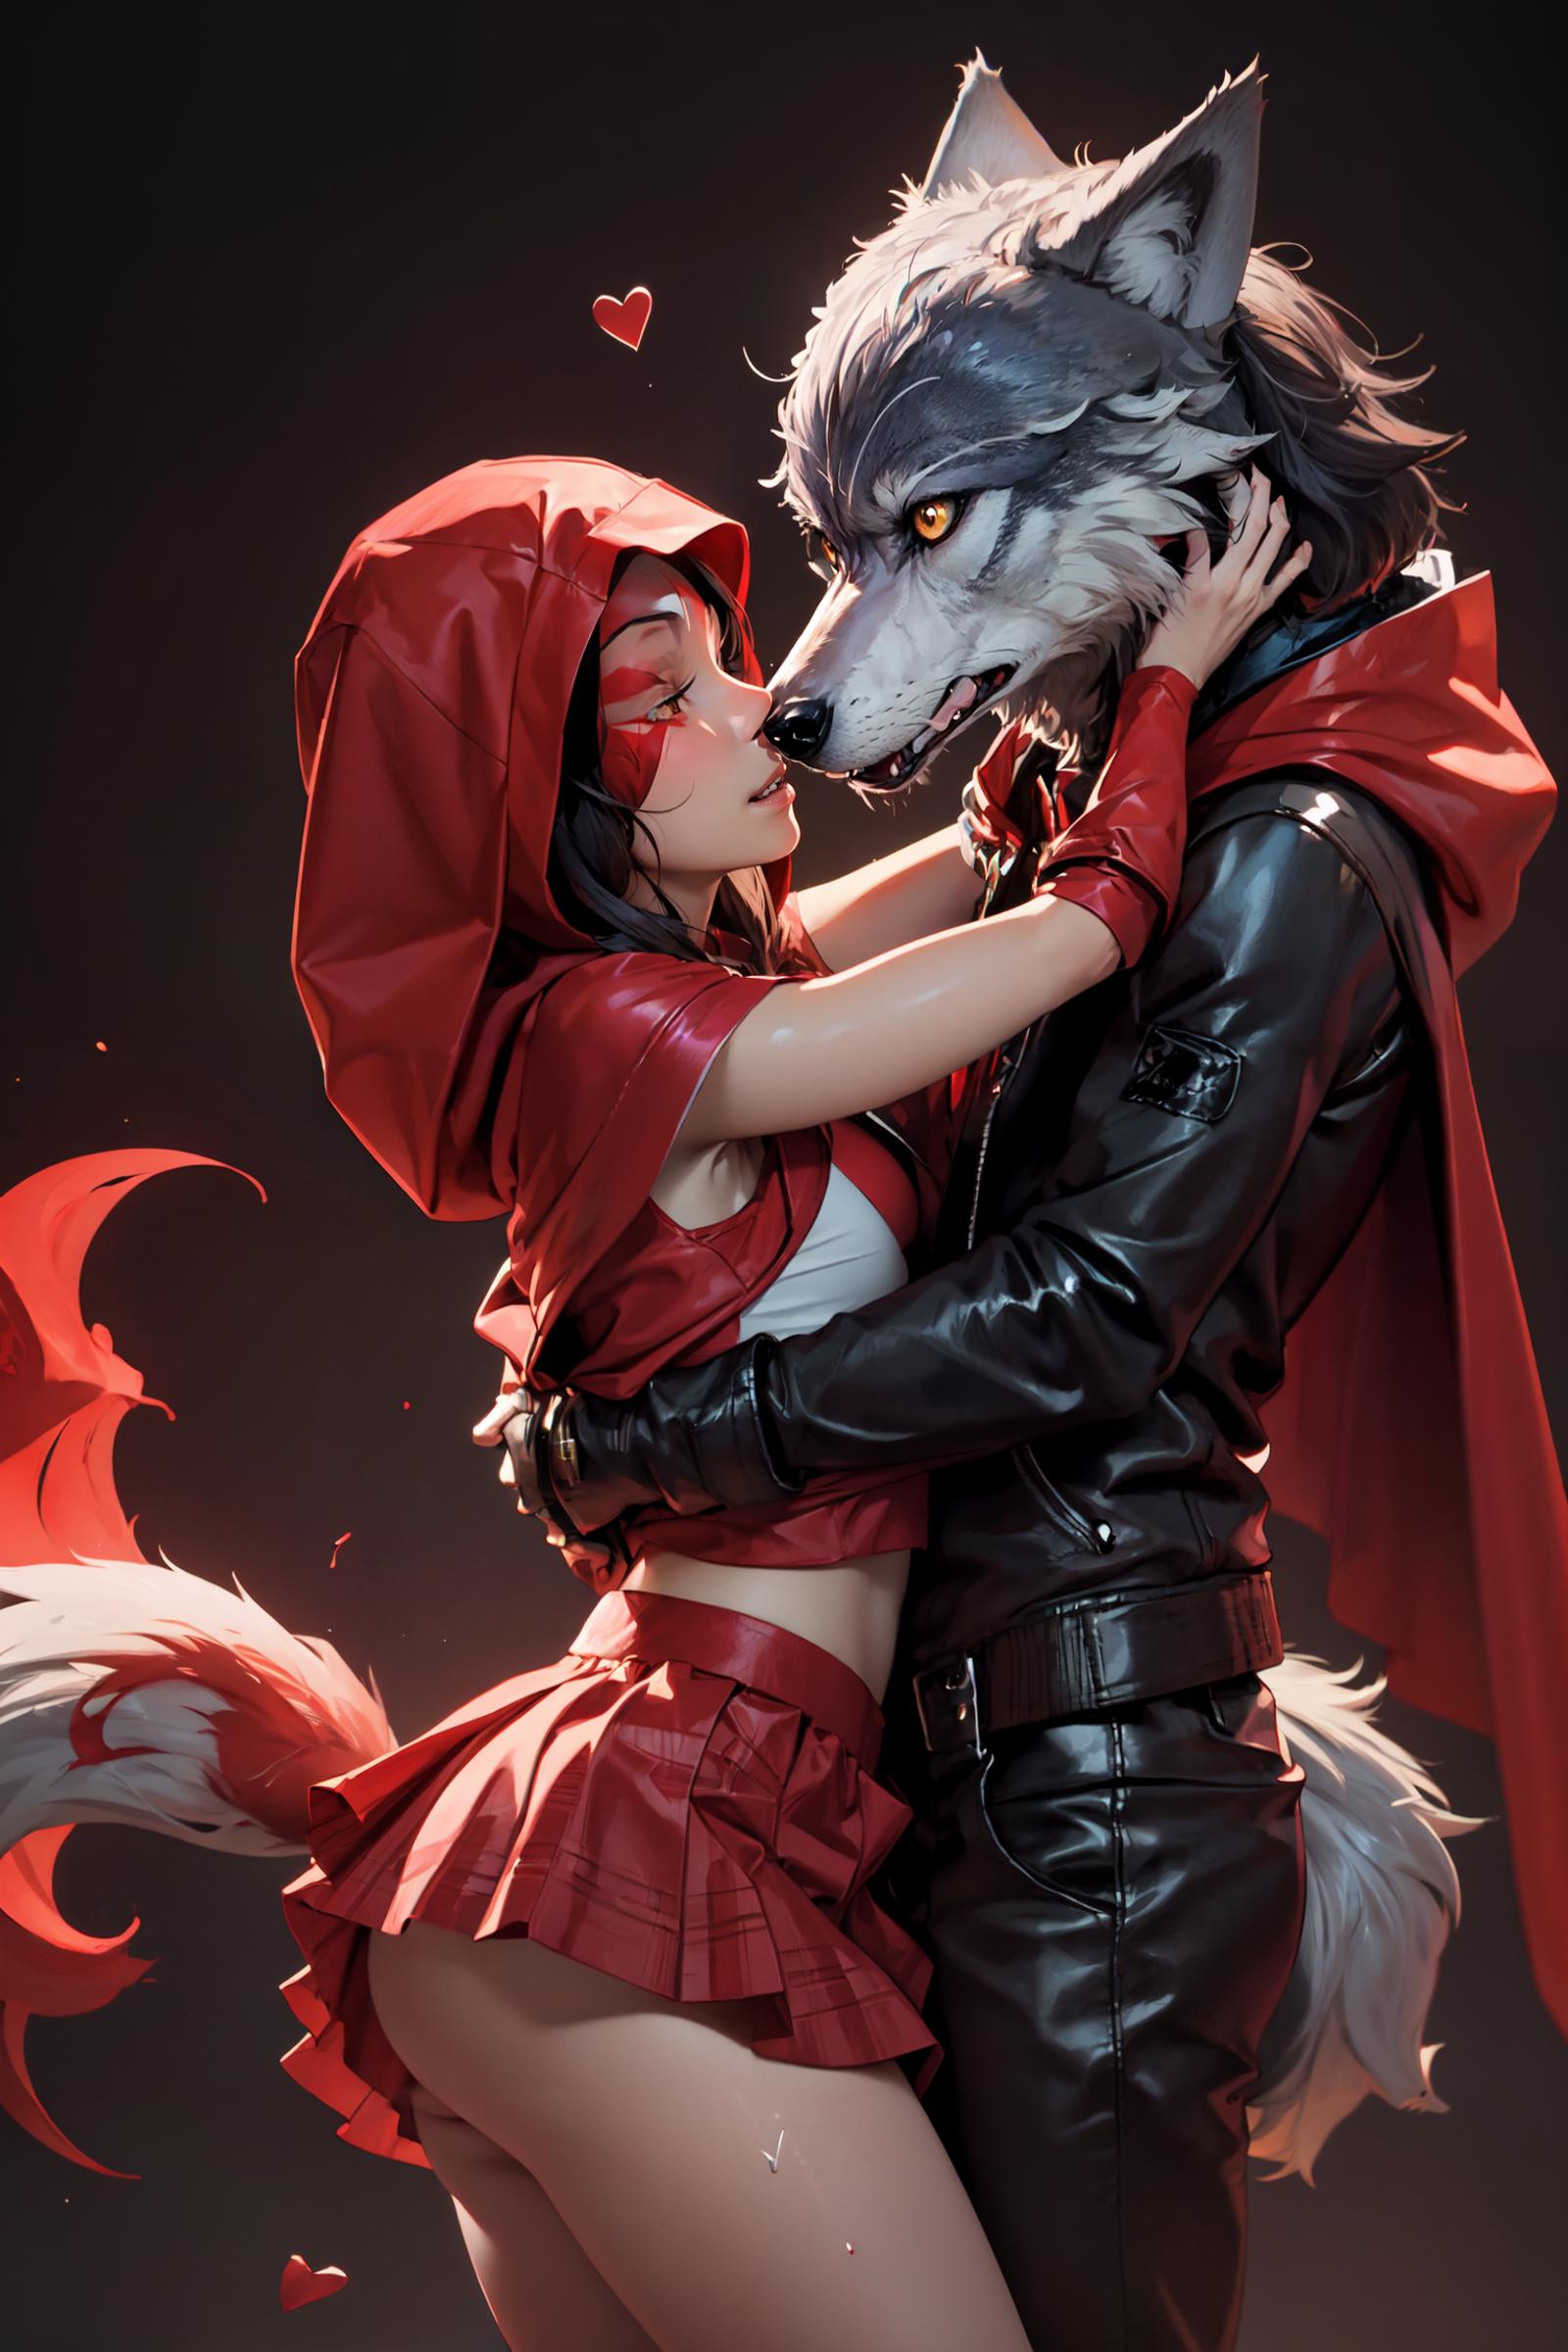 Sexy Little Red Riding Hood outfit|情趣内衣:小红帽疯狂抽插狼先生款 image by shigato